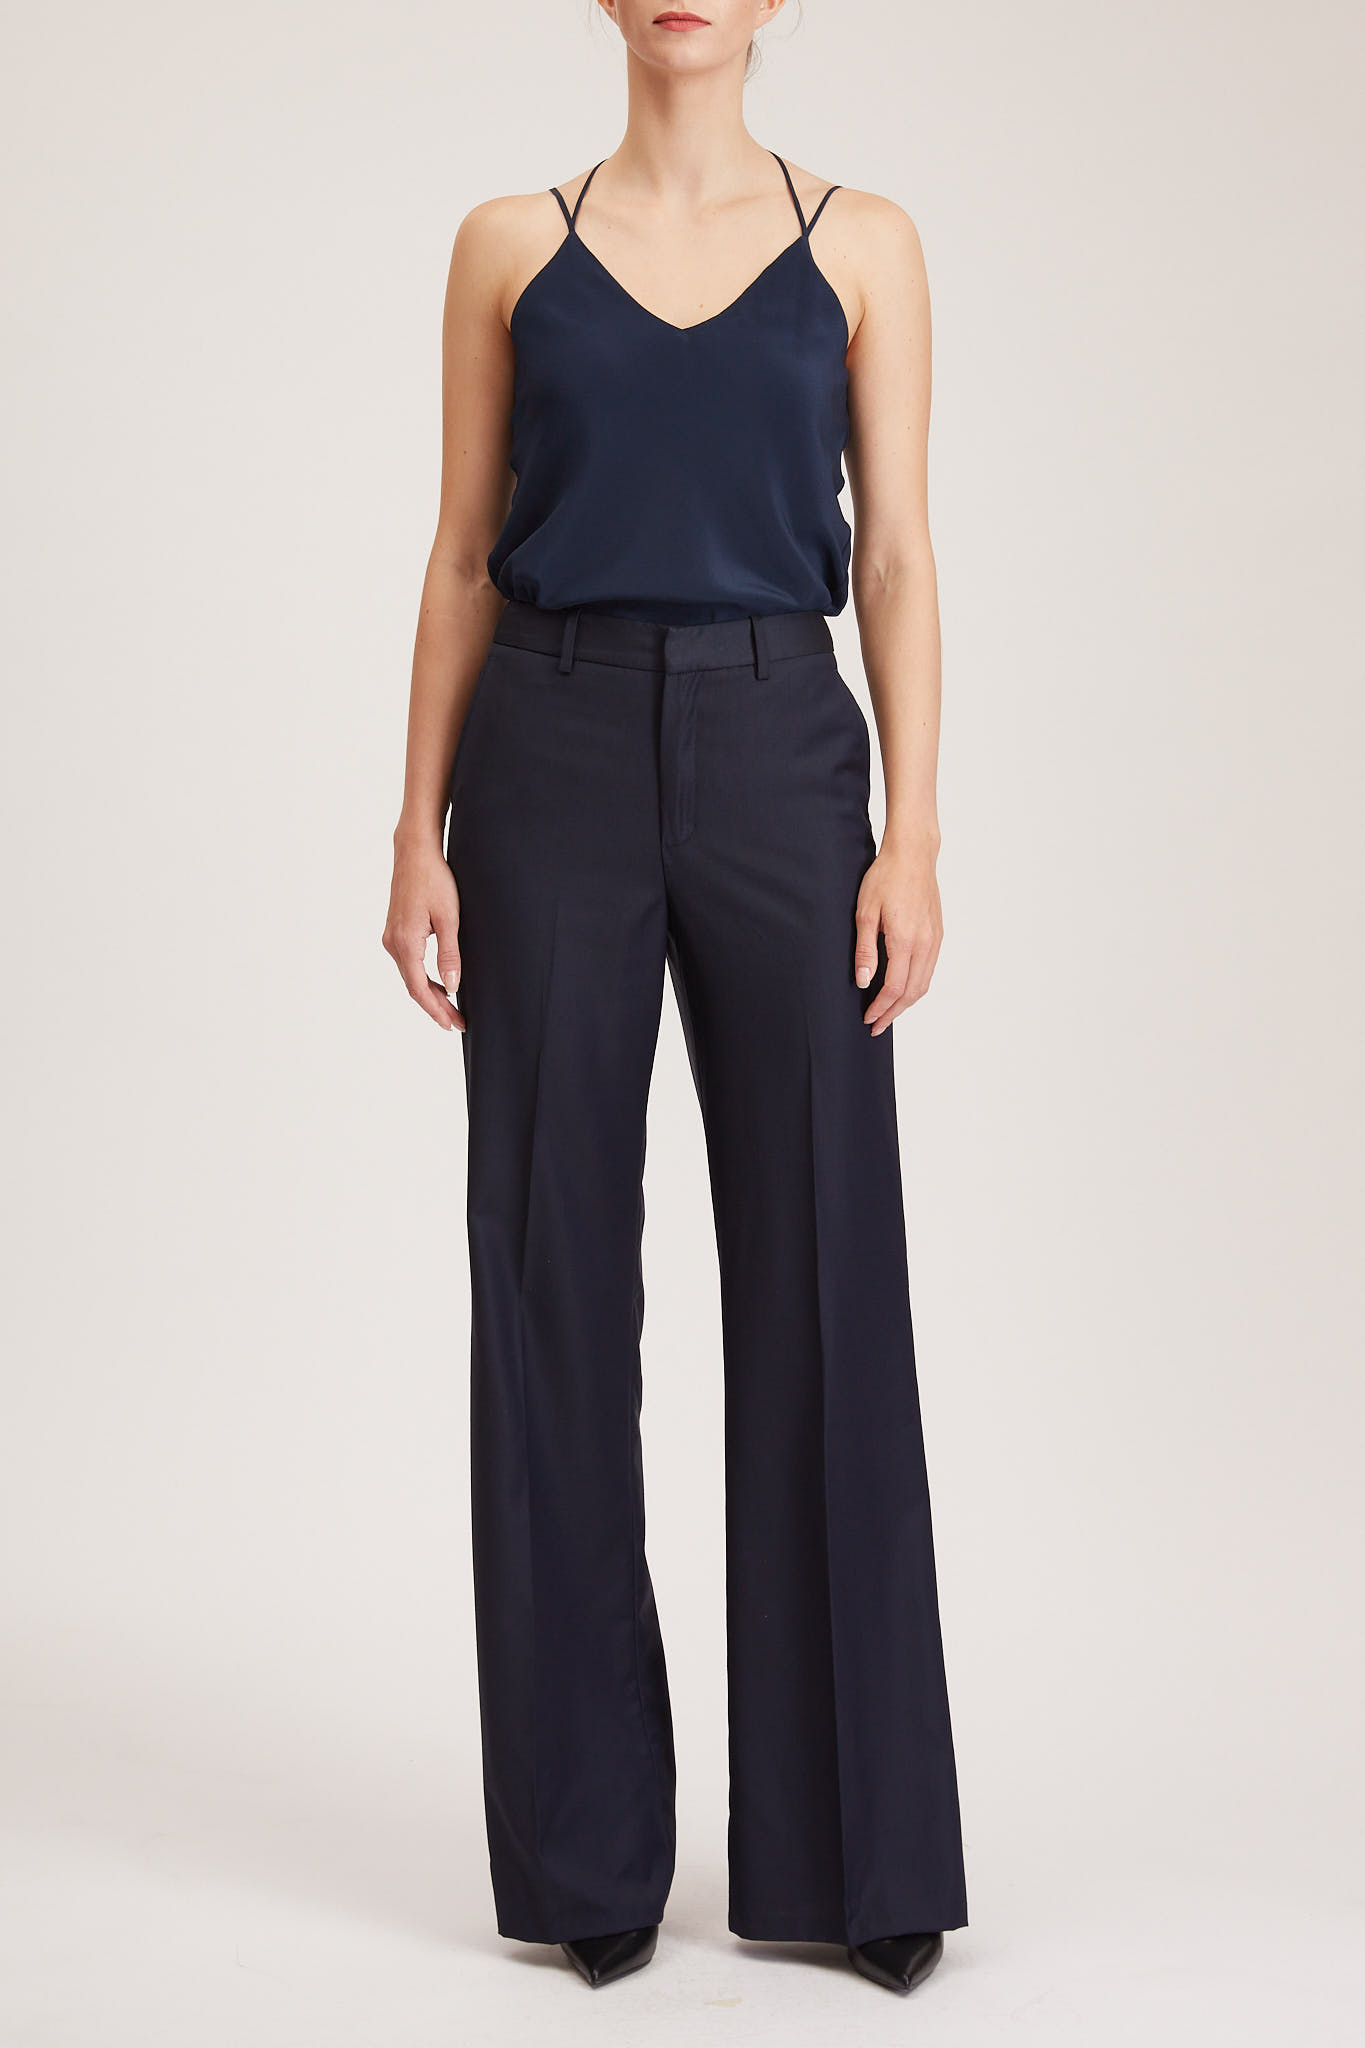 Bordeaux Trouser – Flared trousers in navy pure wool